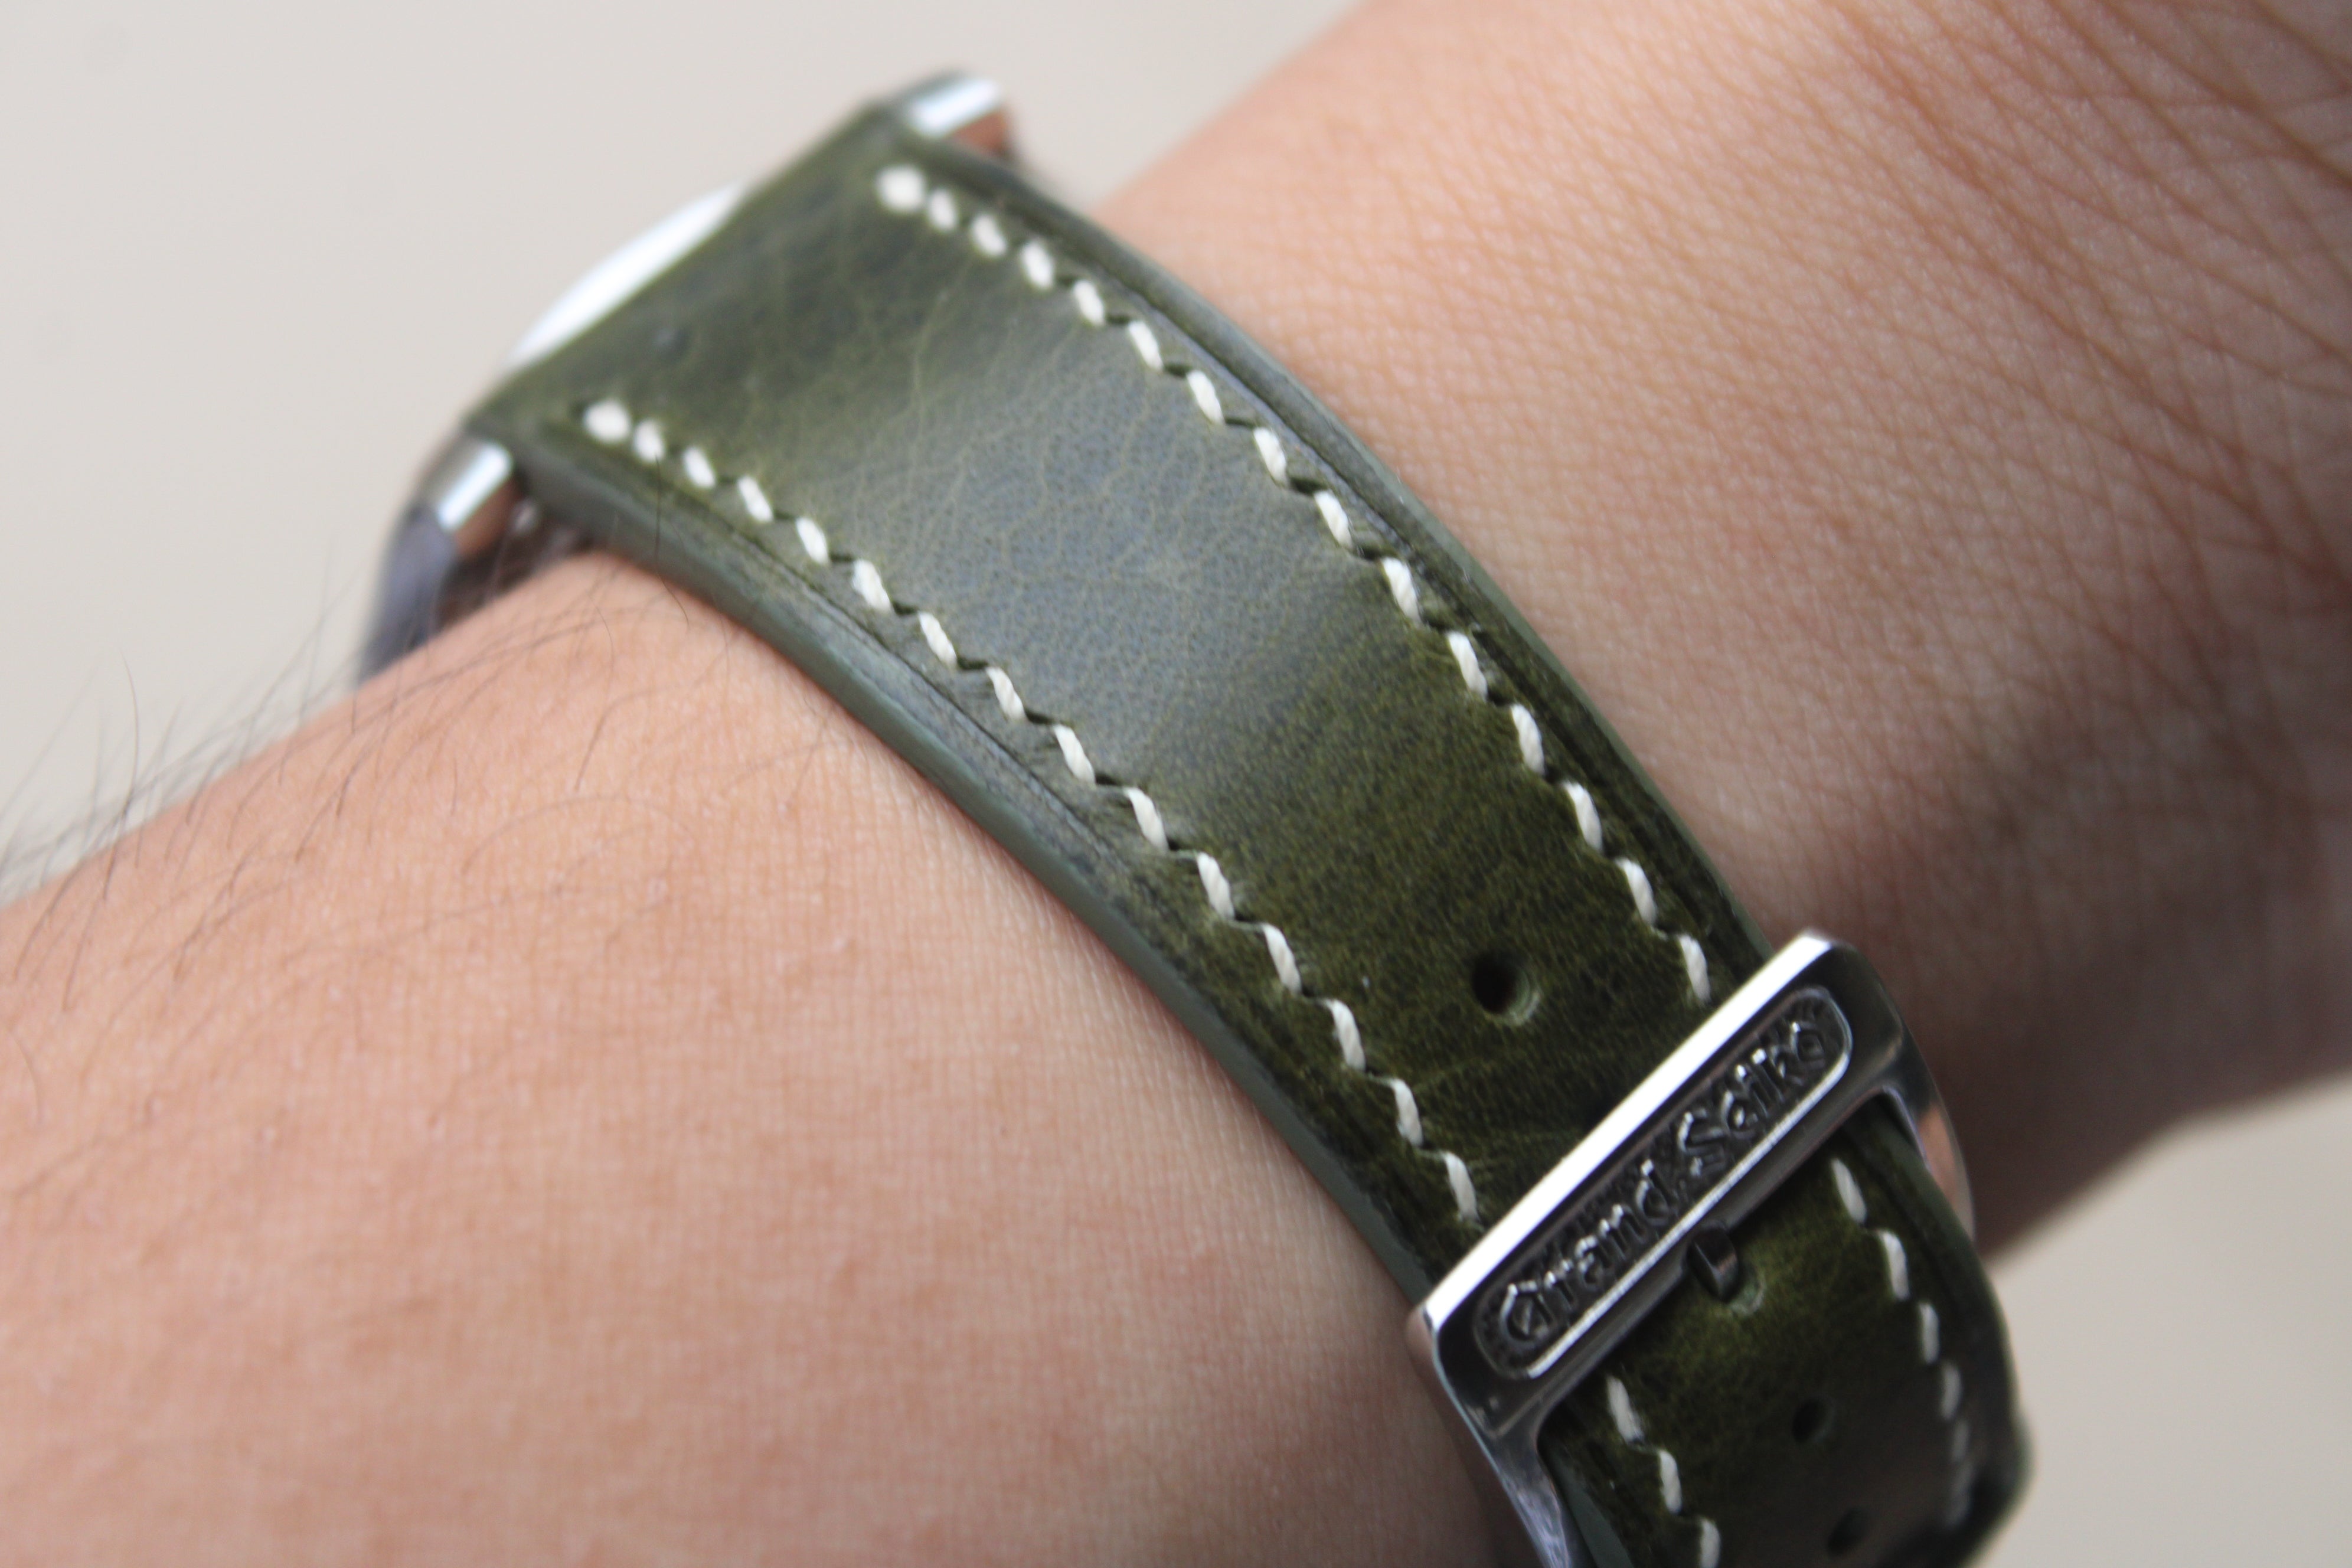 Italian Waxy Calf Leather Strap in Olive - Artisan Straps